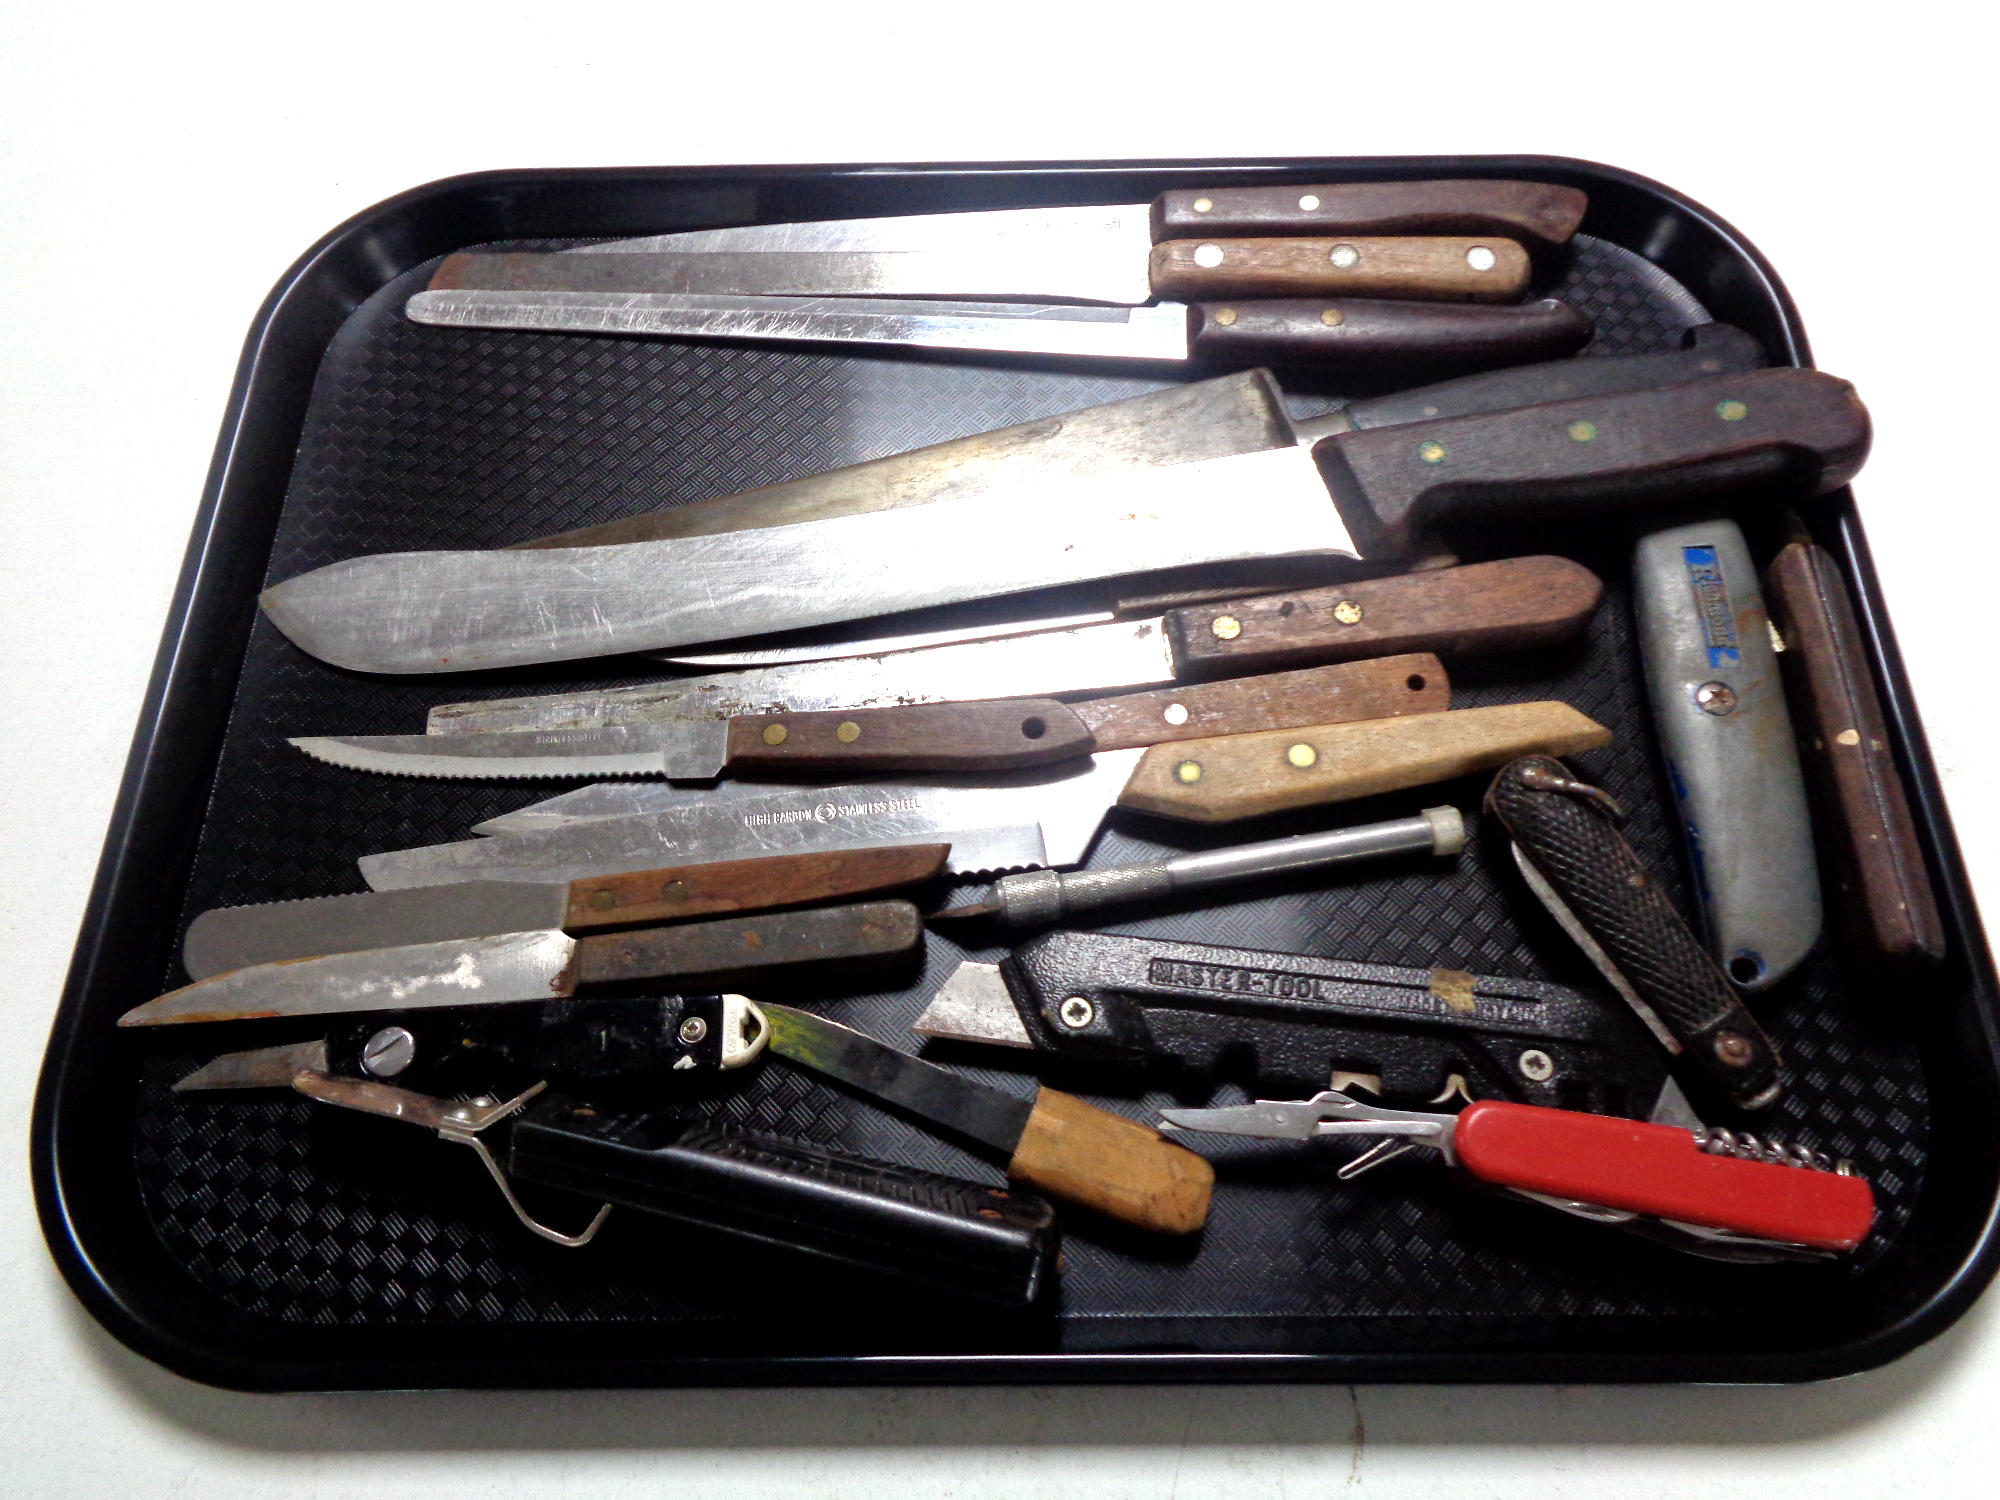 A tray containing a collection of knives to include kitchen knives, steak knives,